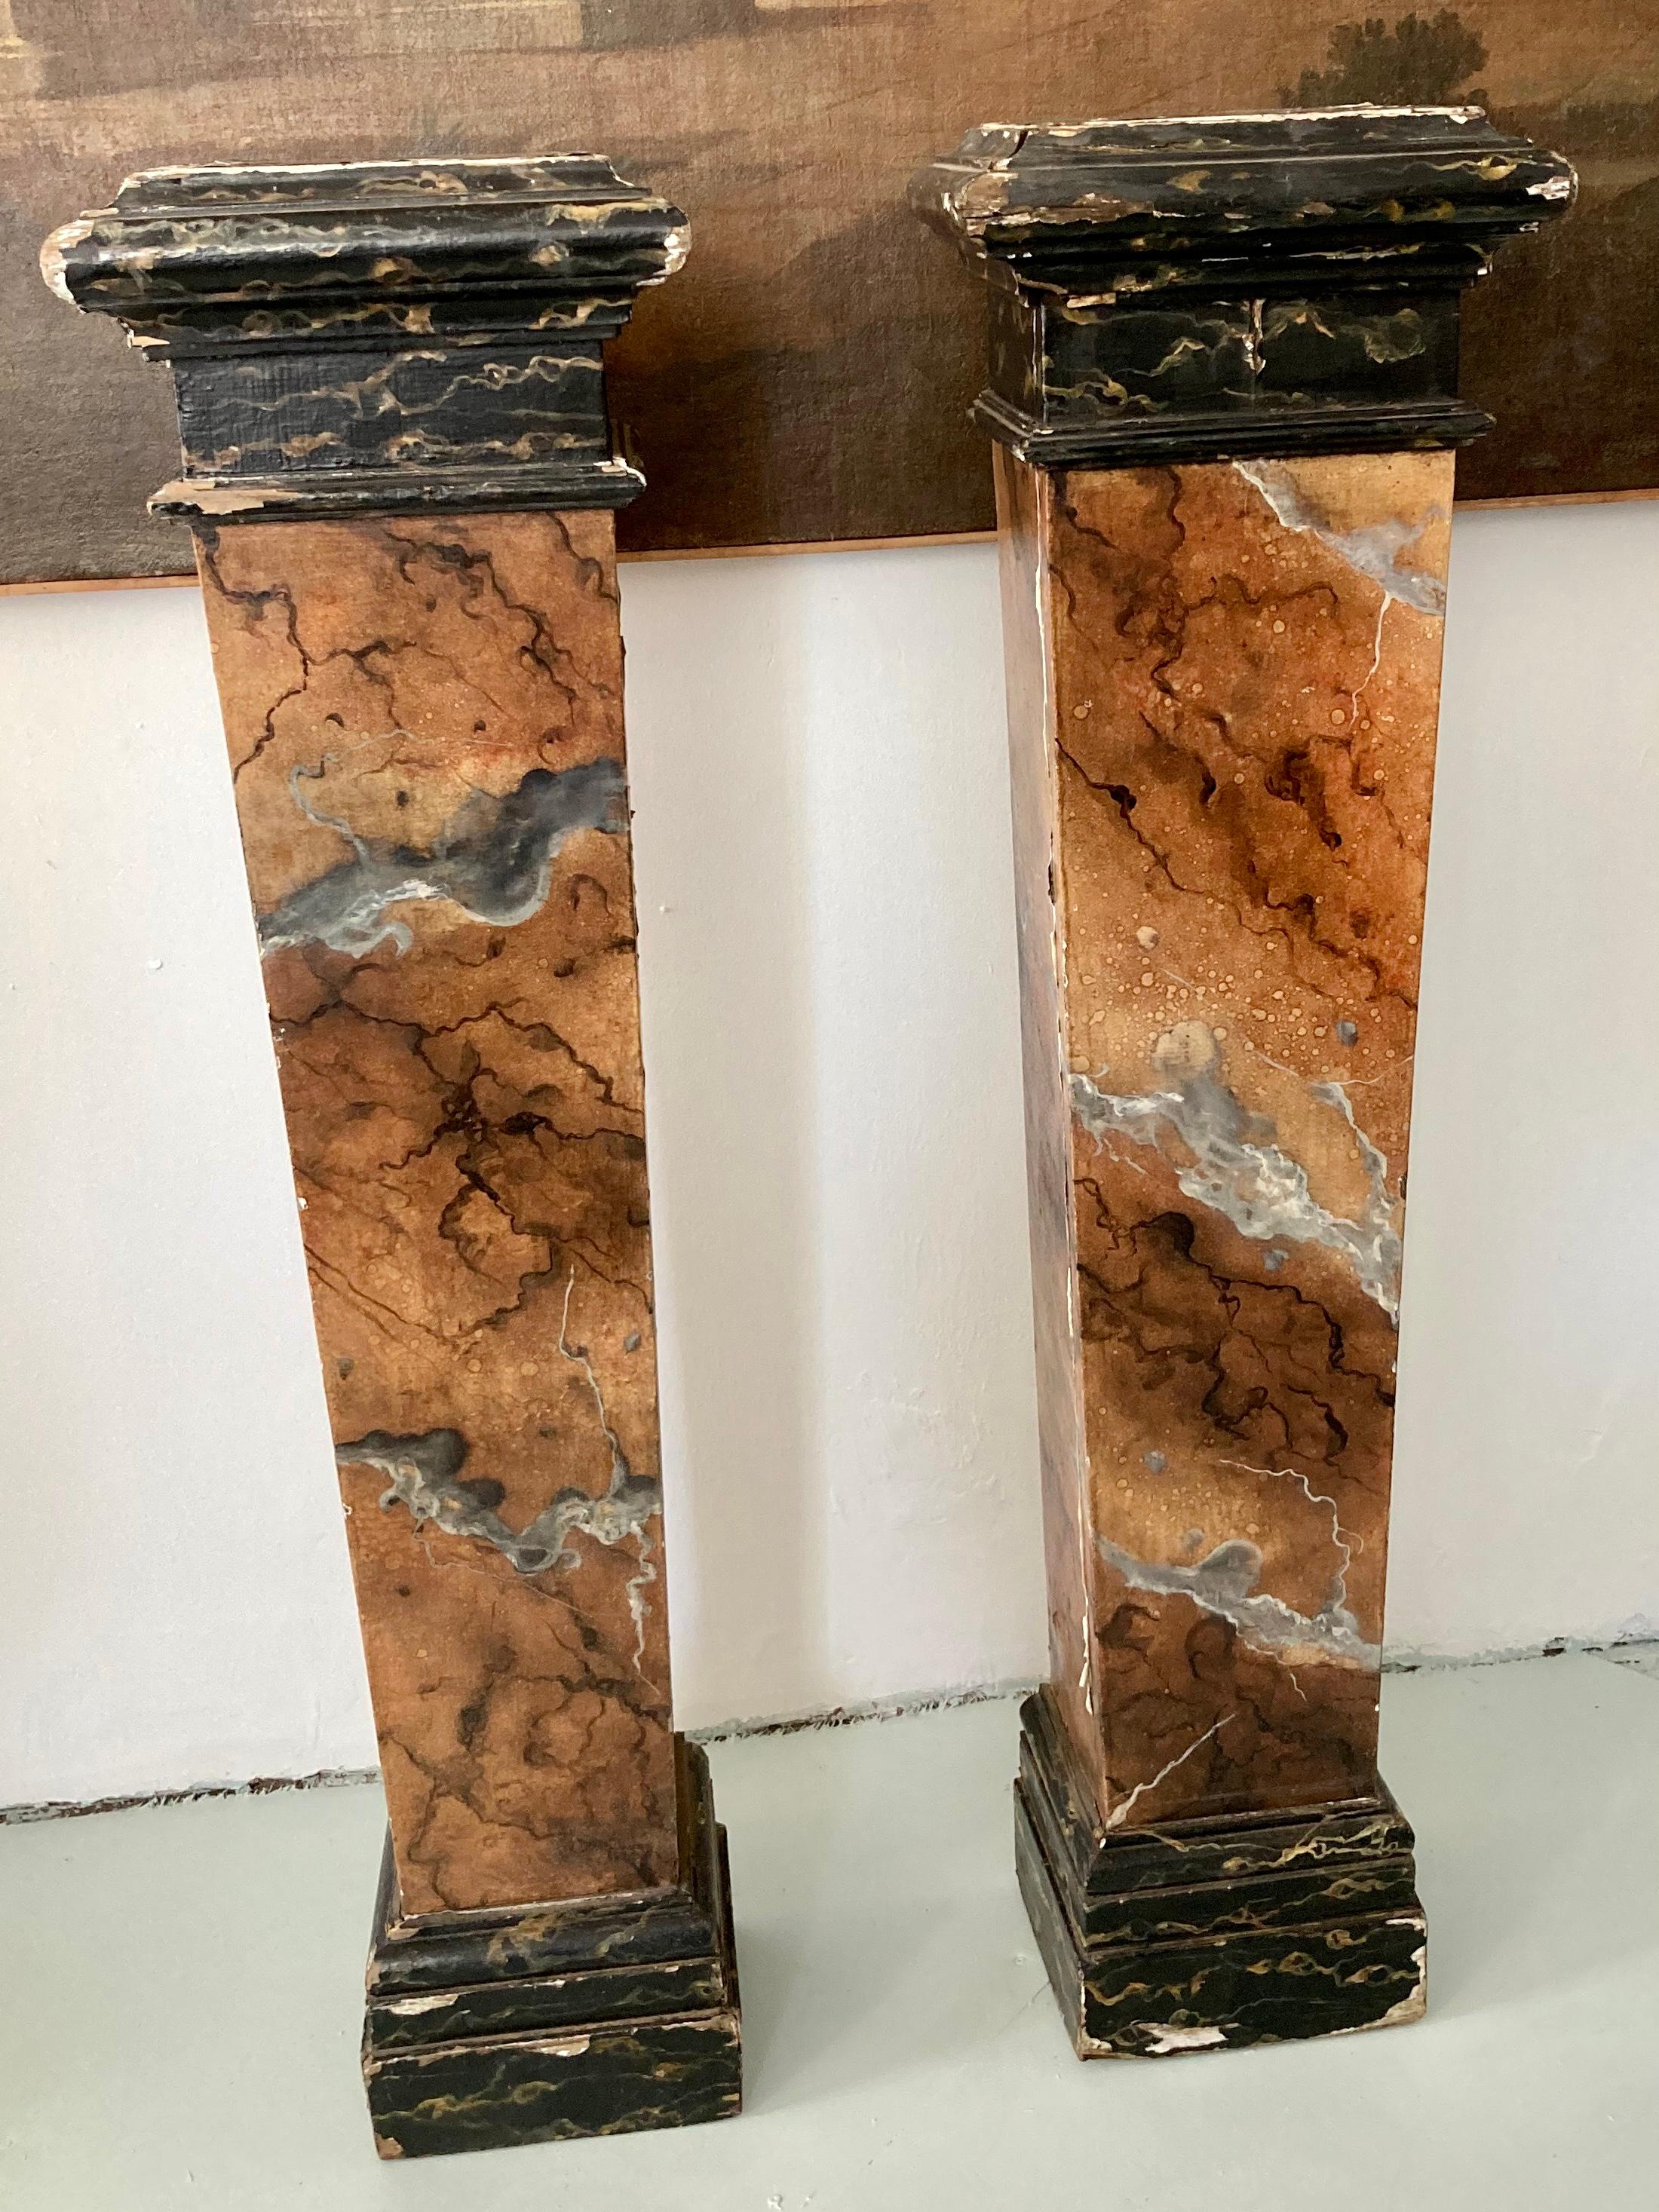 Pair of French faux marble wood pedestals. Great addition to your French architectural inspired interiors. From the estate of Tony Duquette.